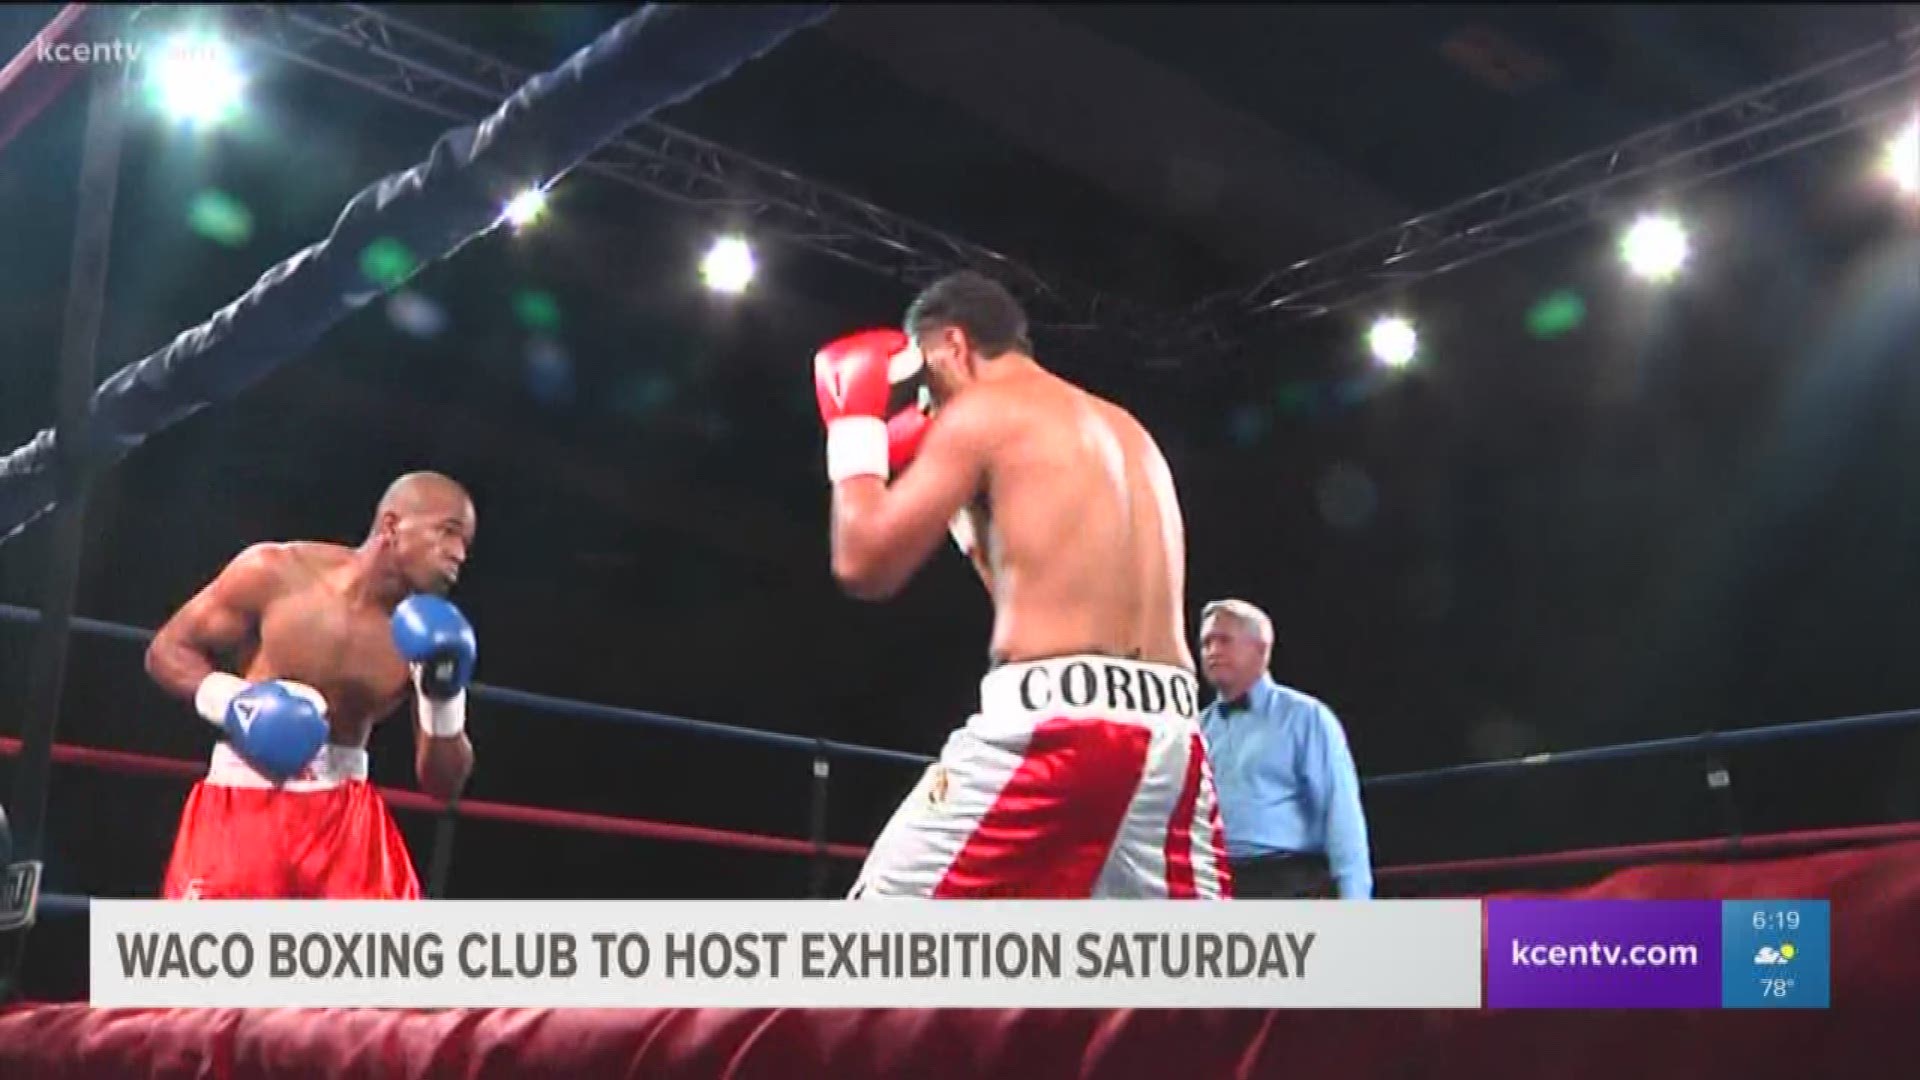 The Waco Boxing Club was founded by Gilbert Sanchez back in 1972